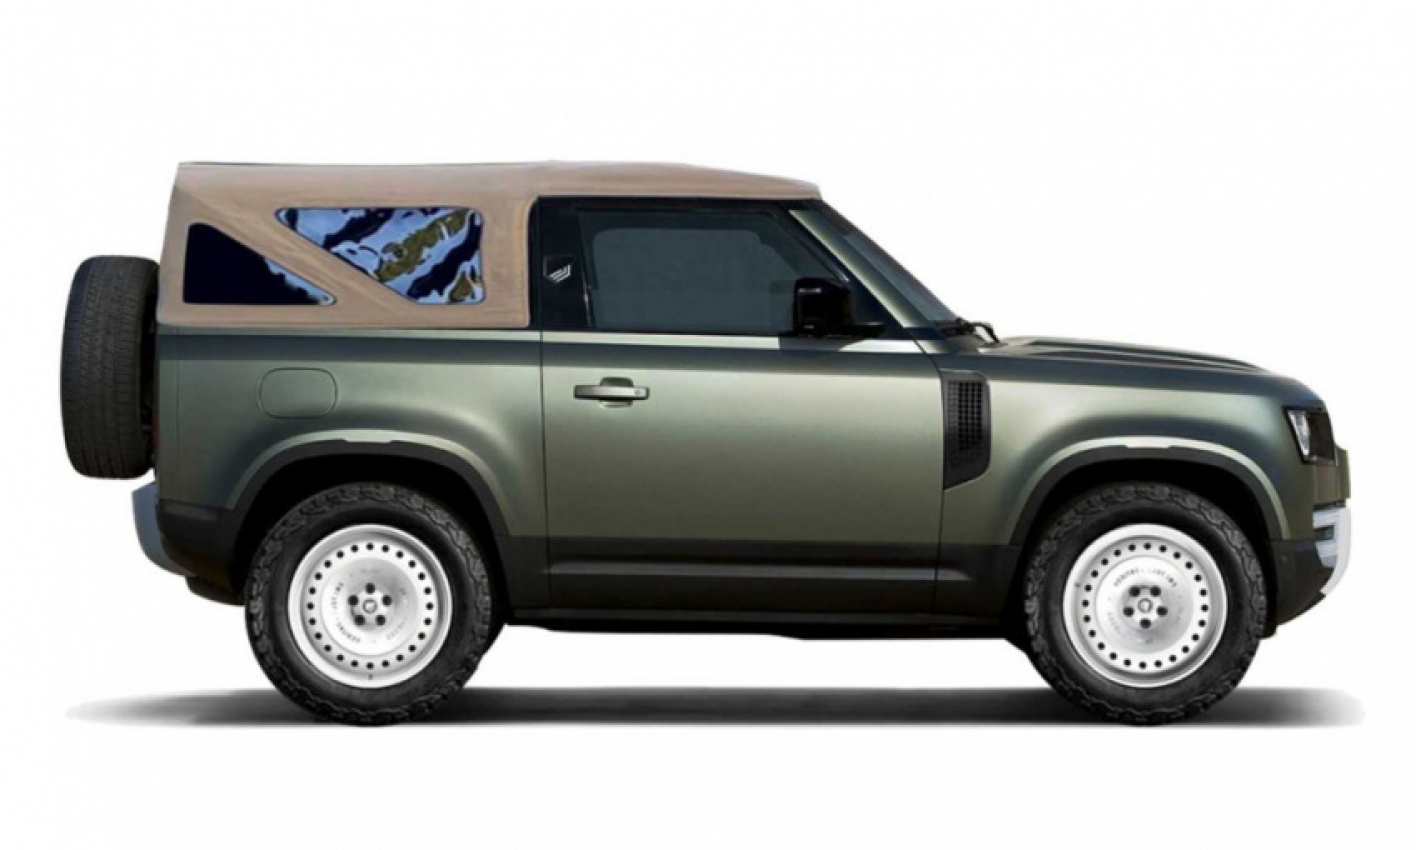 all news, autos, cars, coachbuilders, defender, defender 90, defender convertible, drop top defender, dutch, heritage customs, land rover, land rover defender 90, this drop-top defender is like an evoque convertible but utilitarian